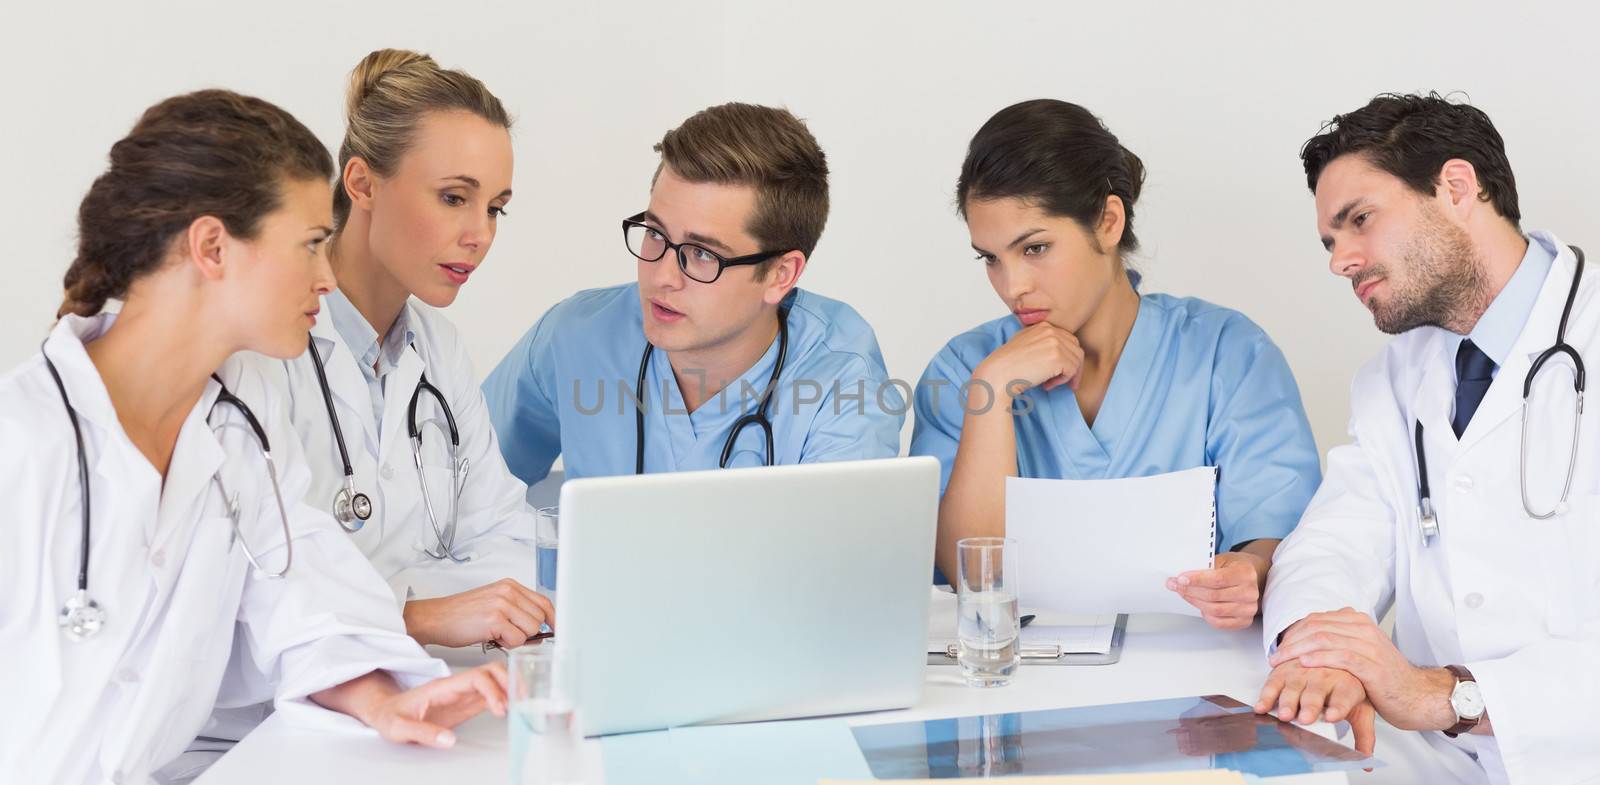 Medical team discussing over laptop  by Wavebreakmedia